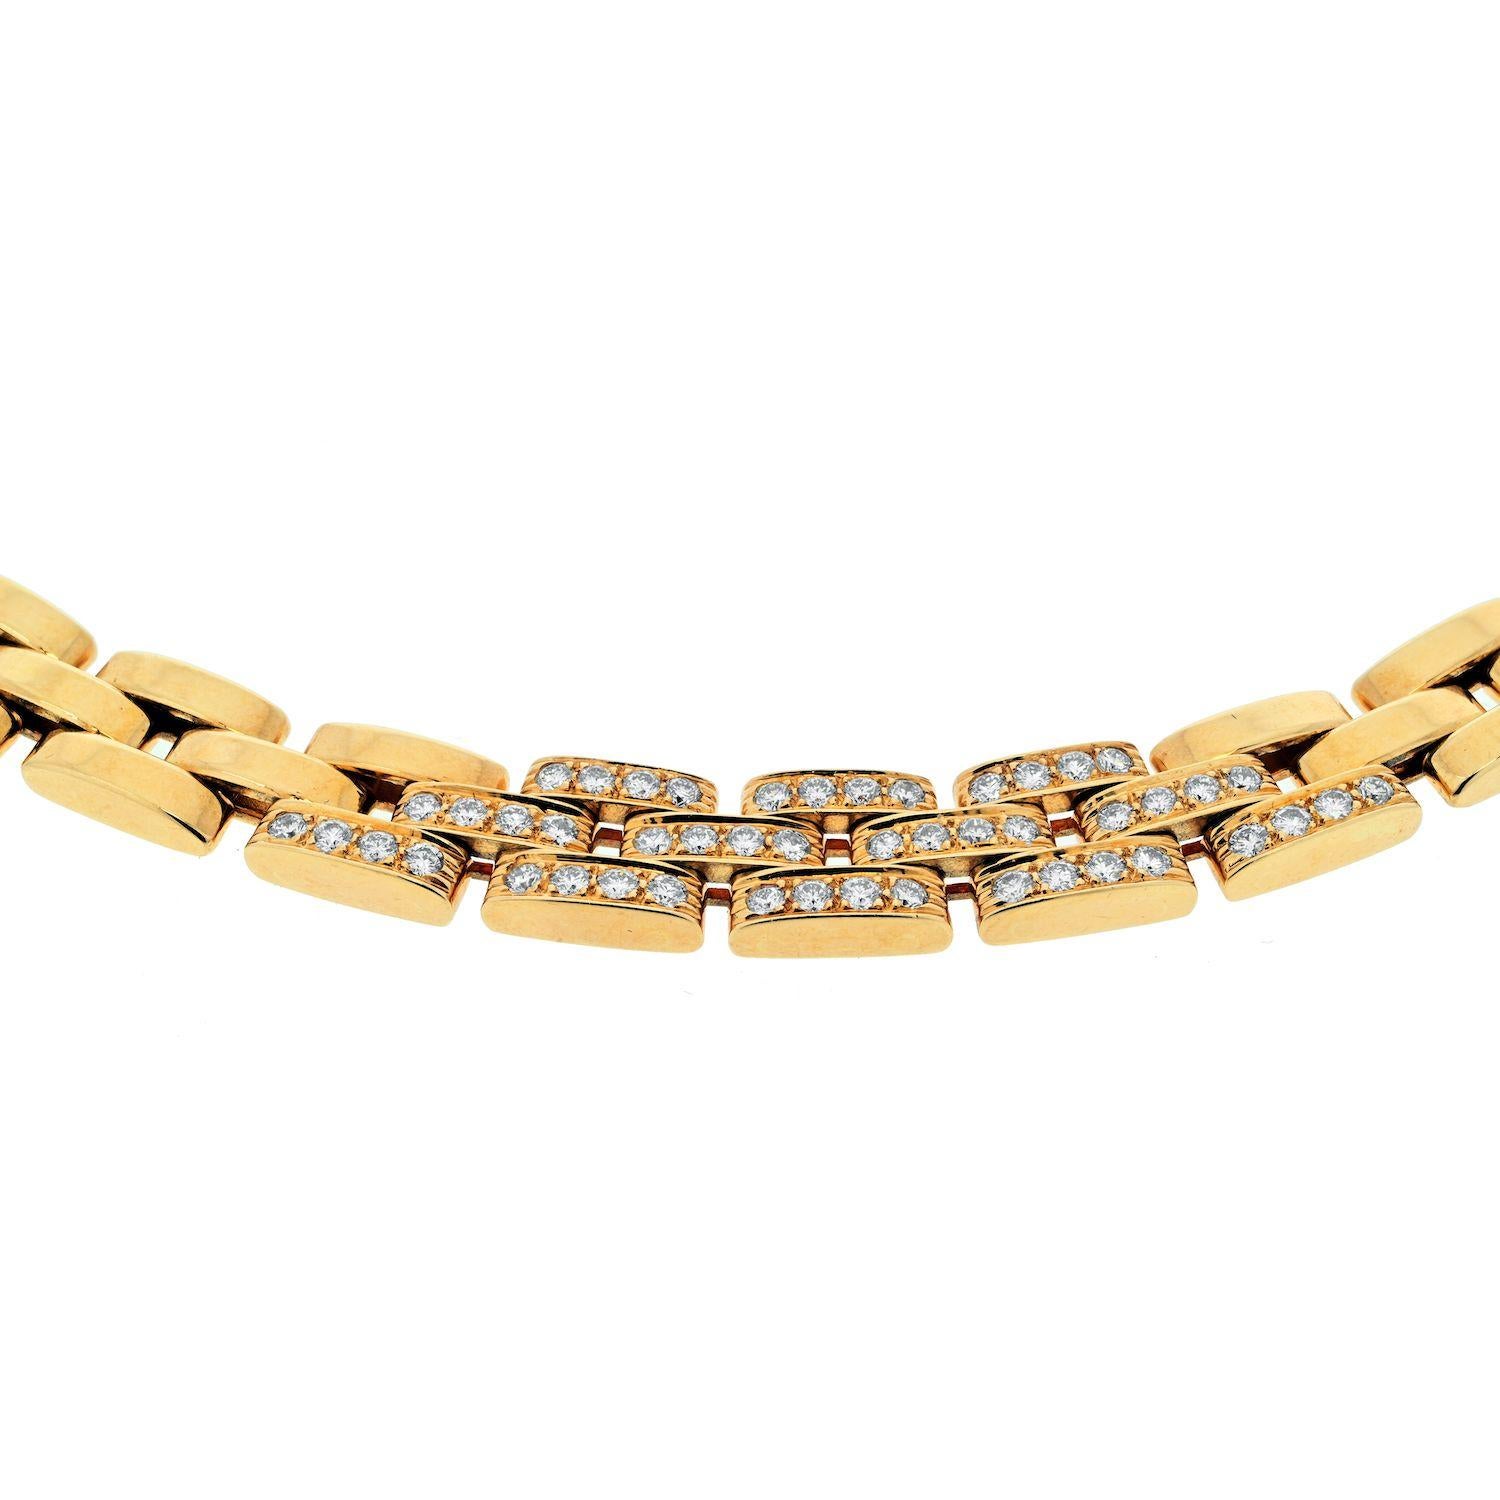 Apart from being a stylistic detail, gold classic necklaces from Cartier symbolize social status and class. Thin to thick, lightweight to hefty, Cartier always designs chains and necklaces that are clean, layerable, and just as casual or